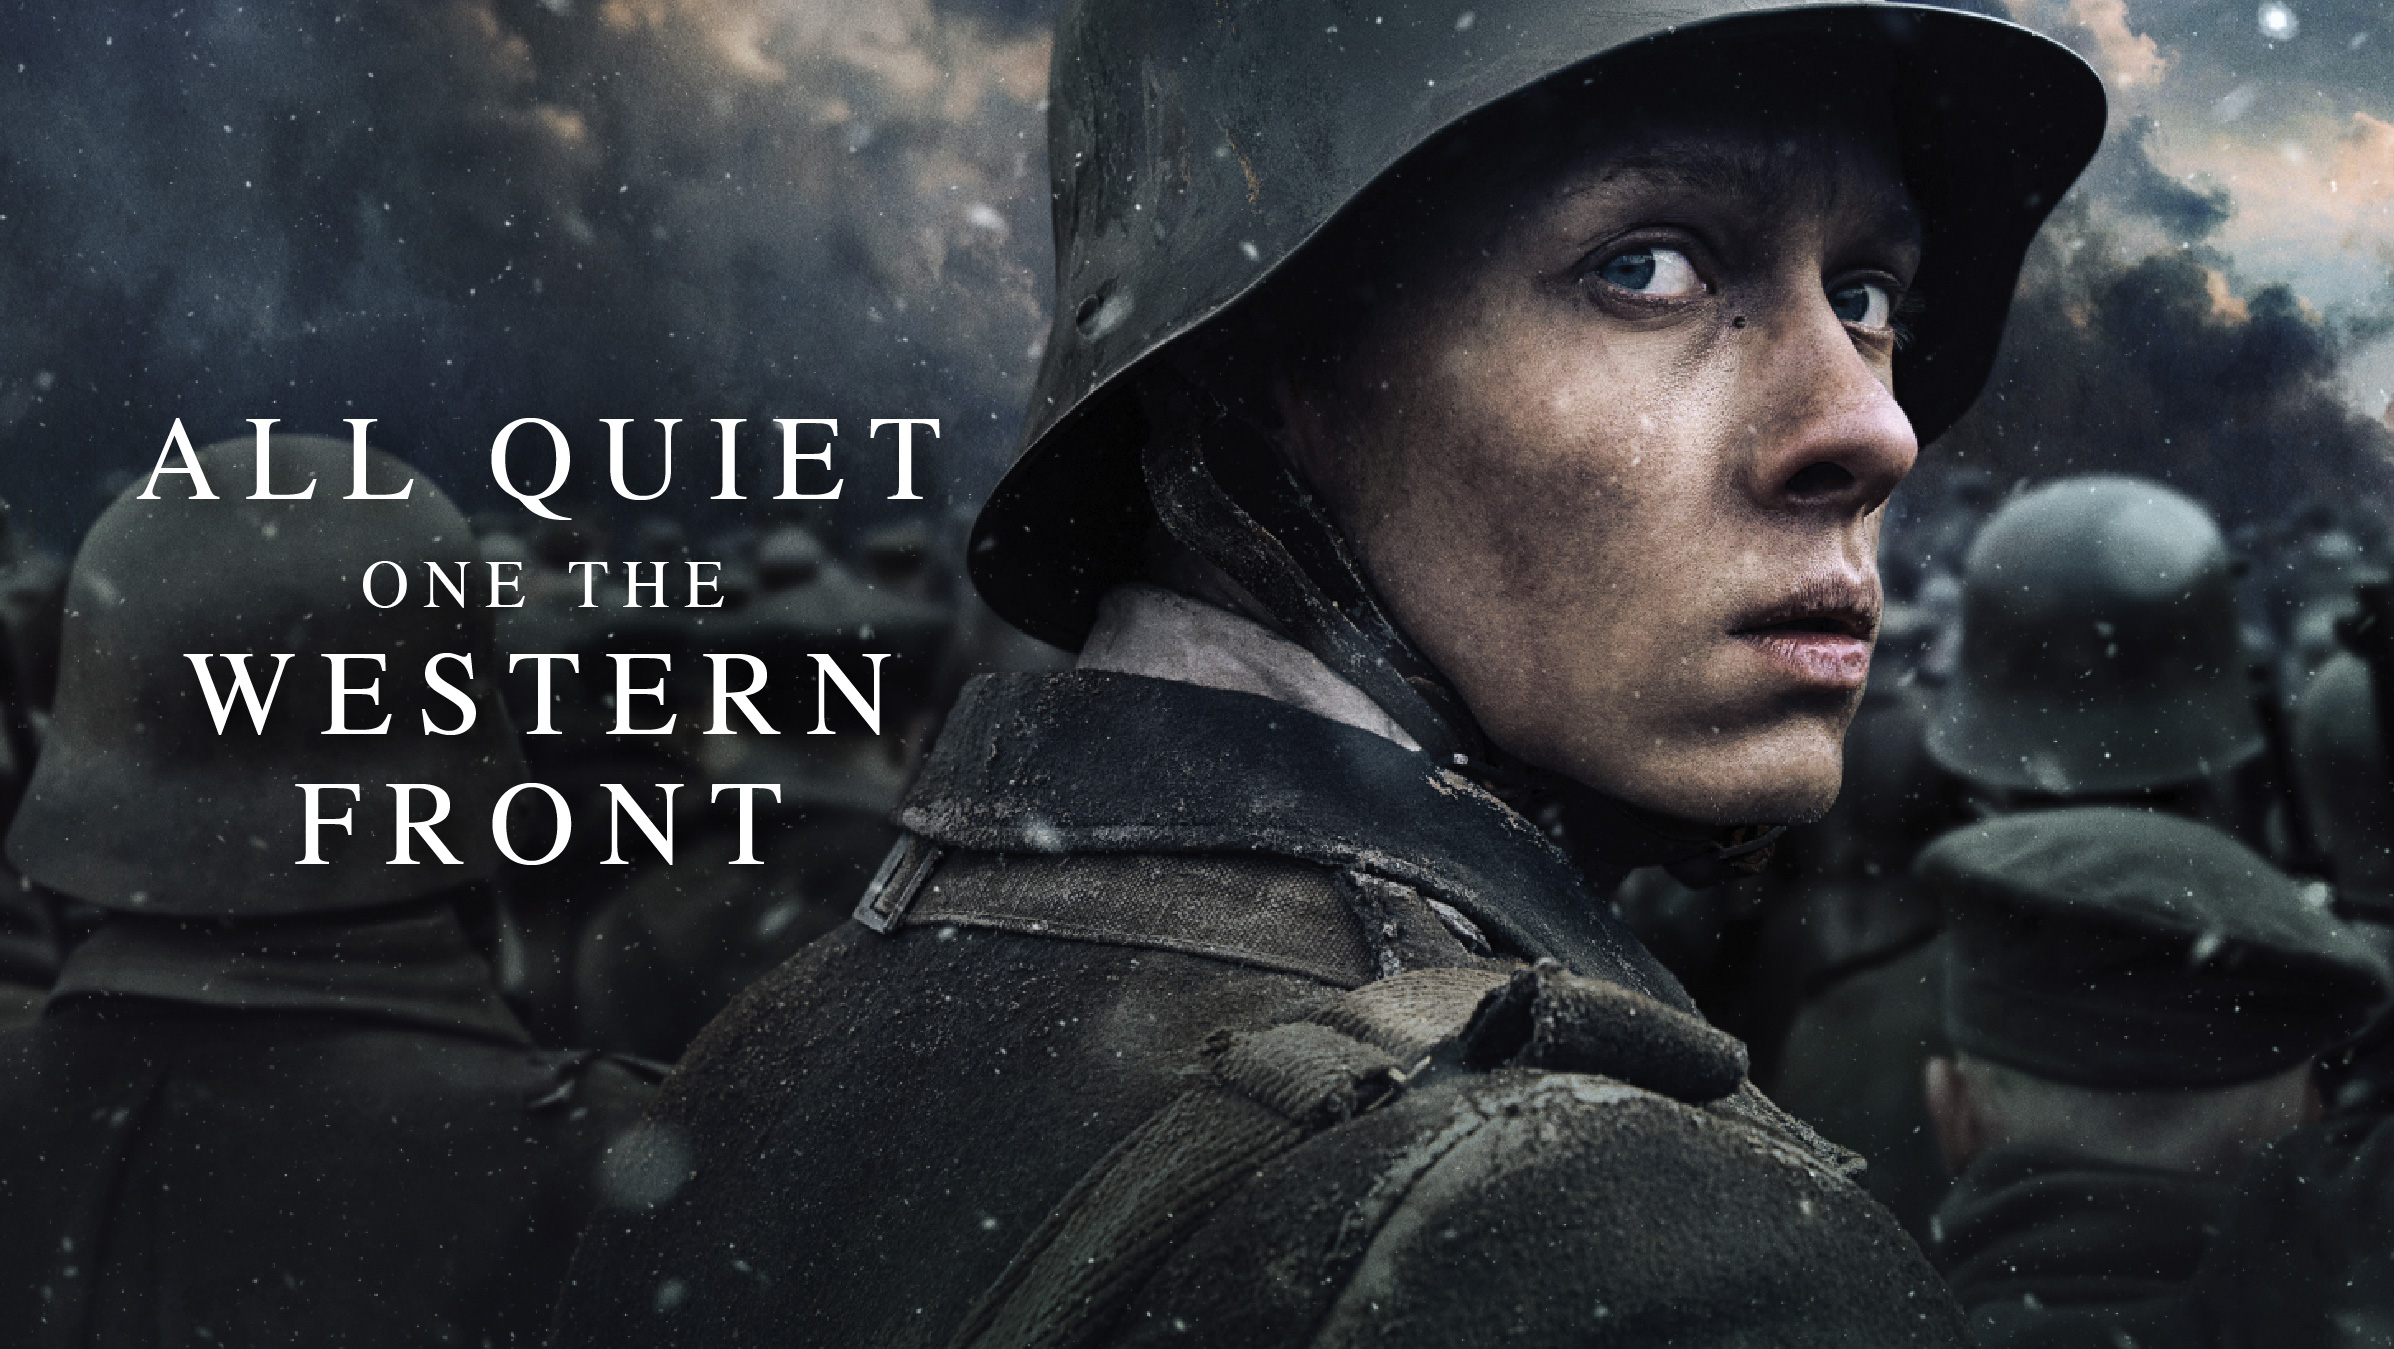 46-facts-about-the-movie-all-quiet-on-the-western-front